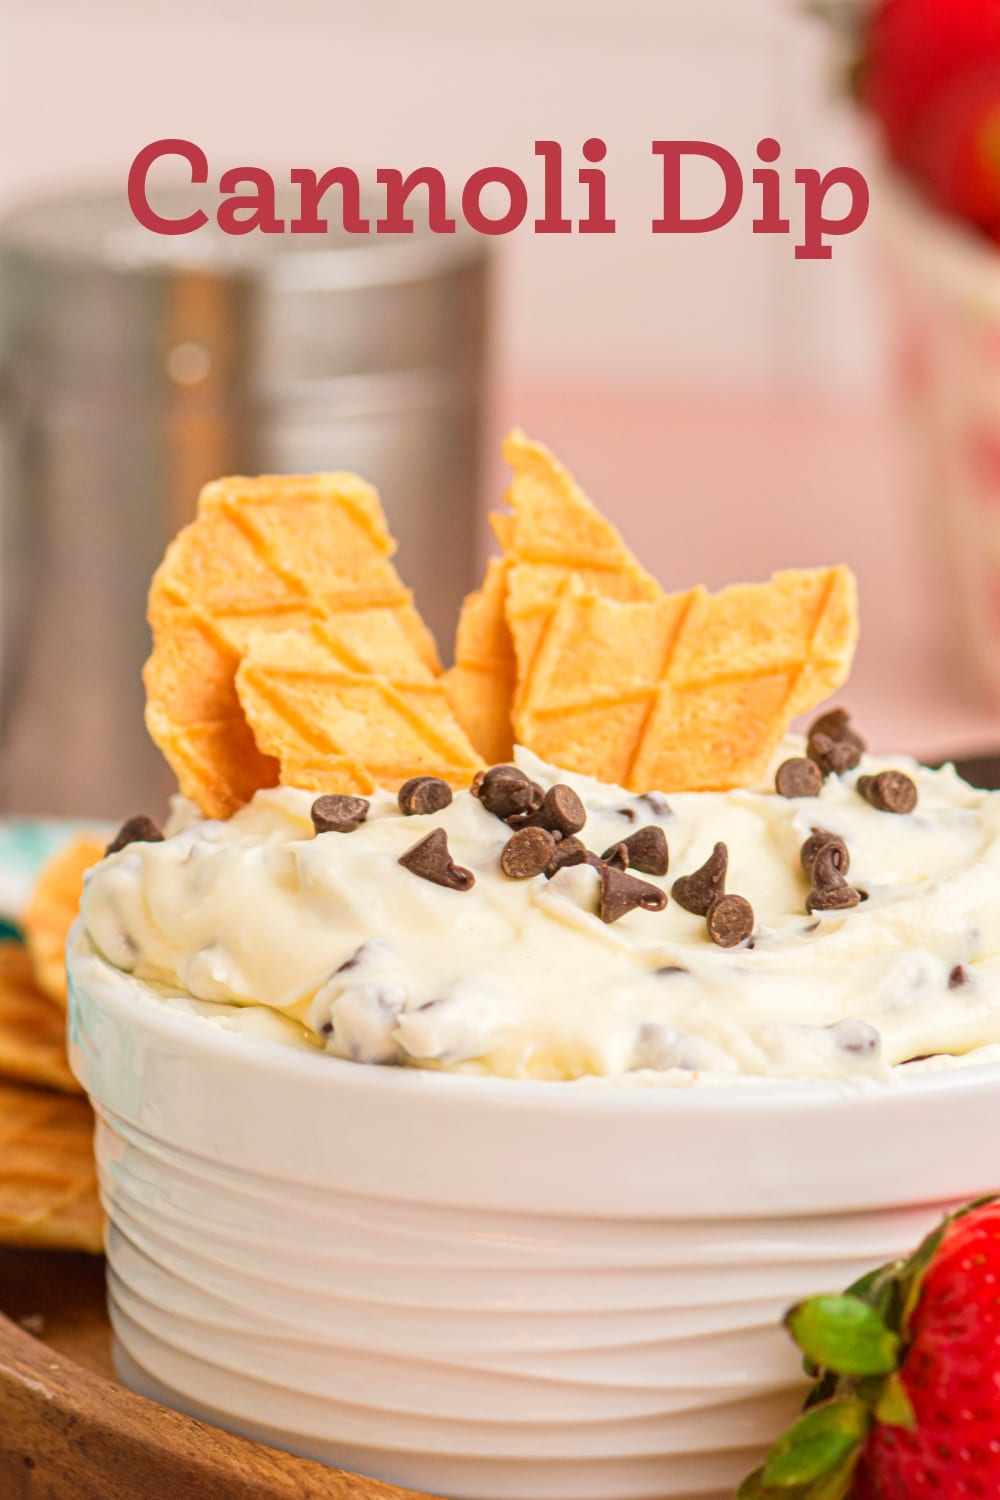 This Cannoli Dip is a deconstructed version of the beloved, classic, Italian pastry. This creamy dessert turns a normally individual eating experience into an interactive party treat your guests are going to love. via @cmpollak1